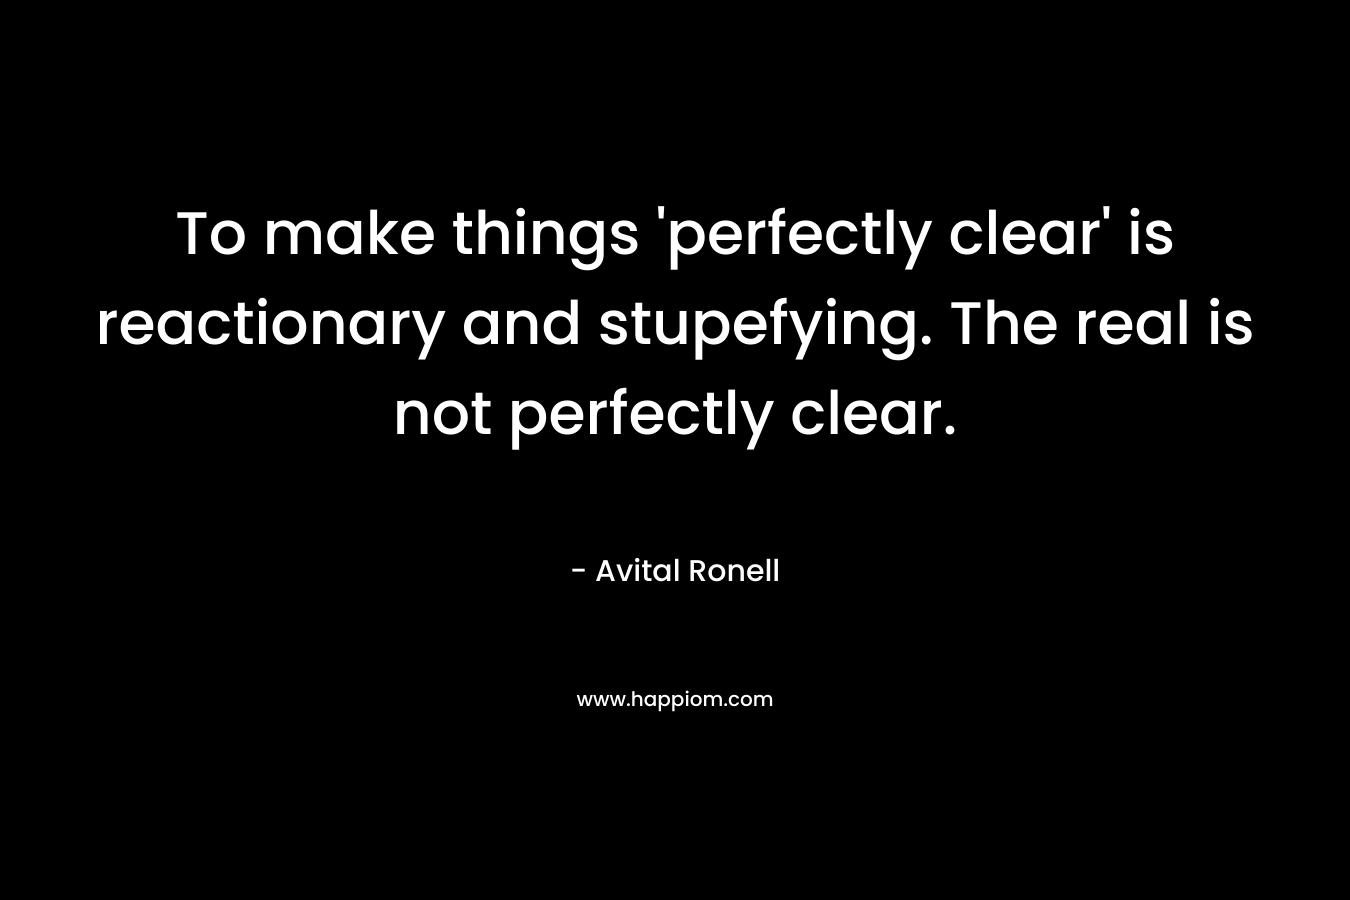 To make things 'perfectly clear' is reactionary and stupefying. The real is not perfectly clear.